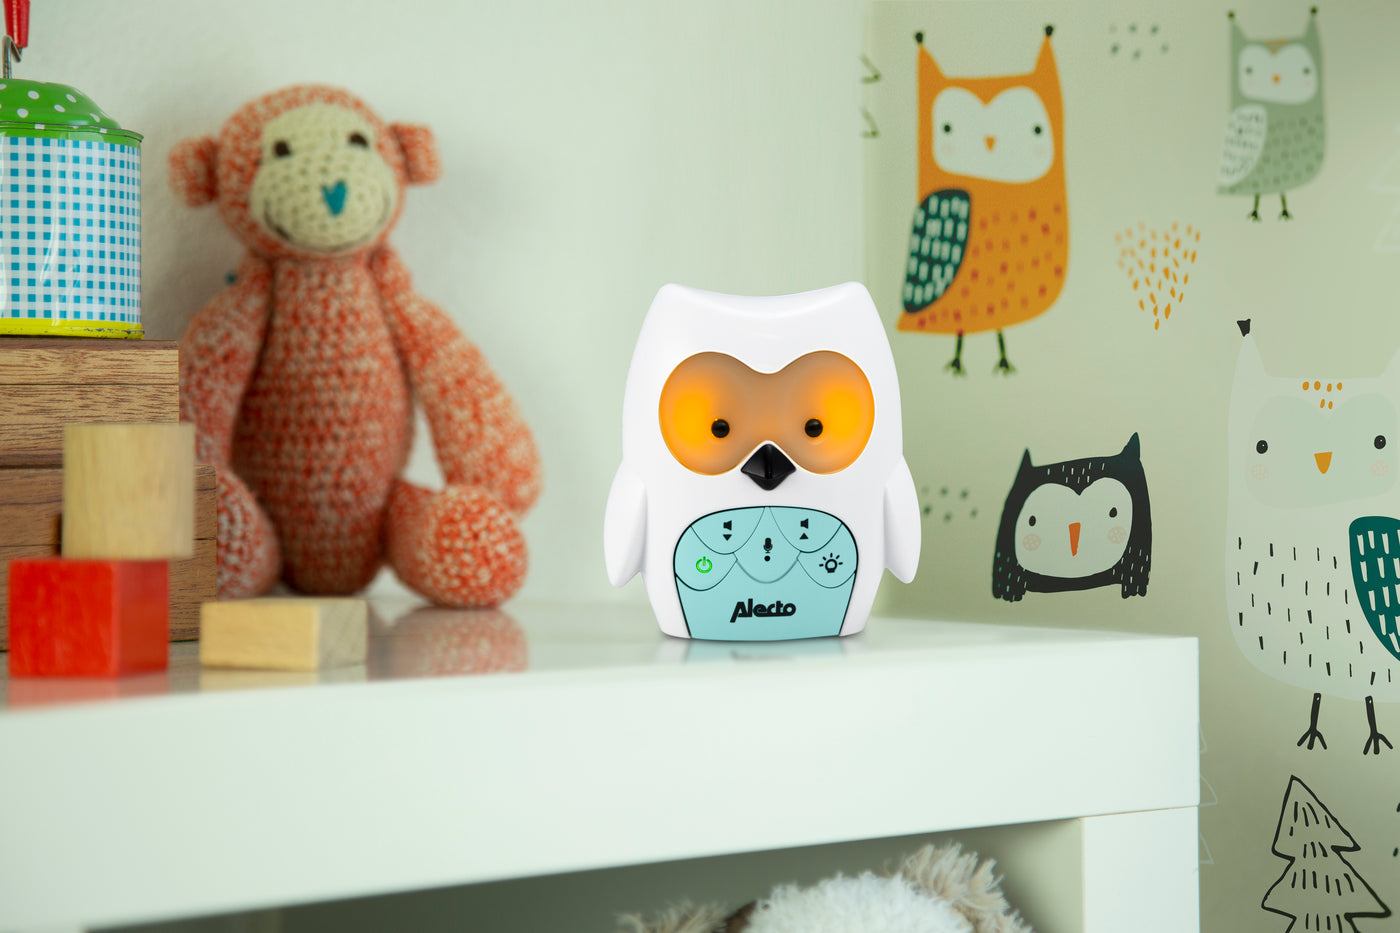 Alecto DBX-84 - DECT baby monitor owl, white/mint